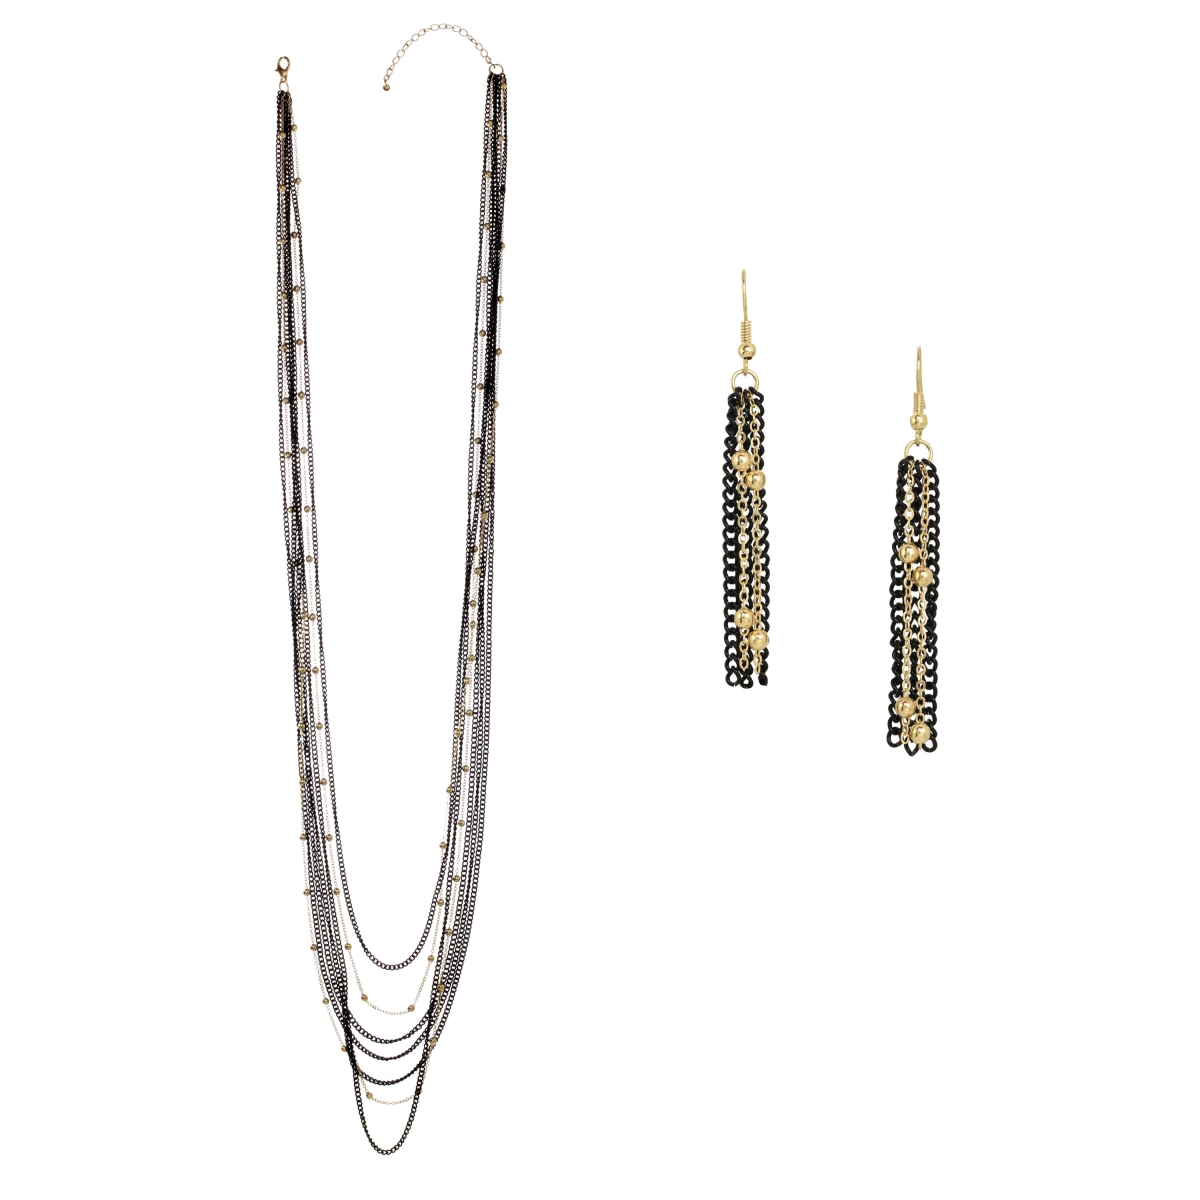 Picture of Alexa Starr 7168-SET-LG Swag Short or Long Multi-Strand Chain and Tassel Drop Earrings Jewelry Set